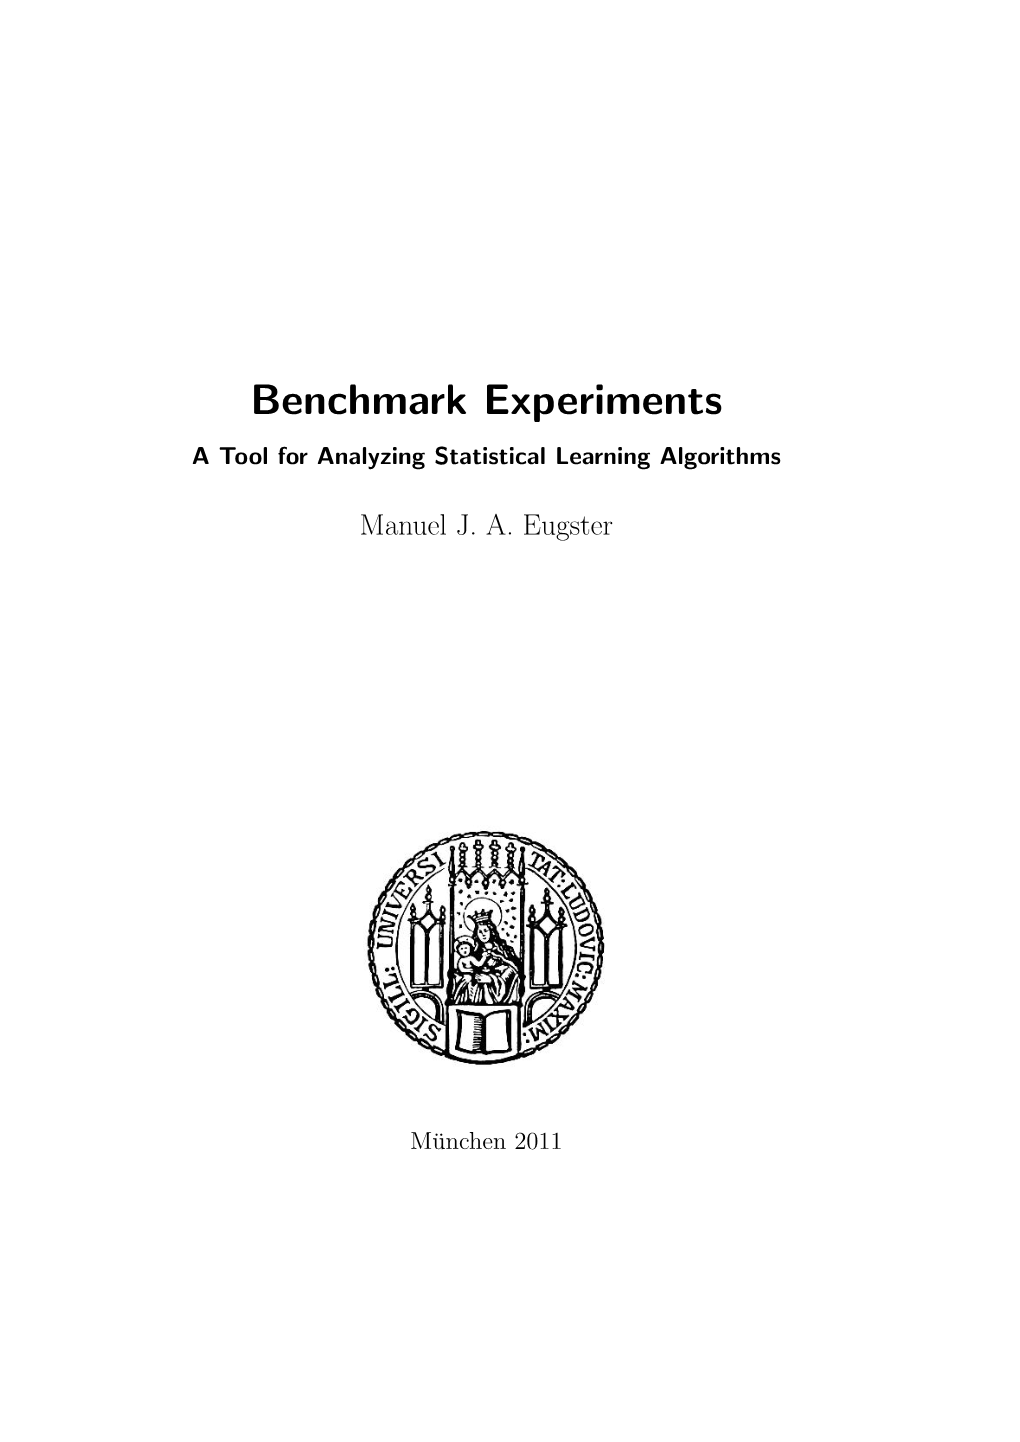 Benchmark Experiments – a Tool for Analyzing Statistical Learning